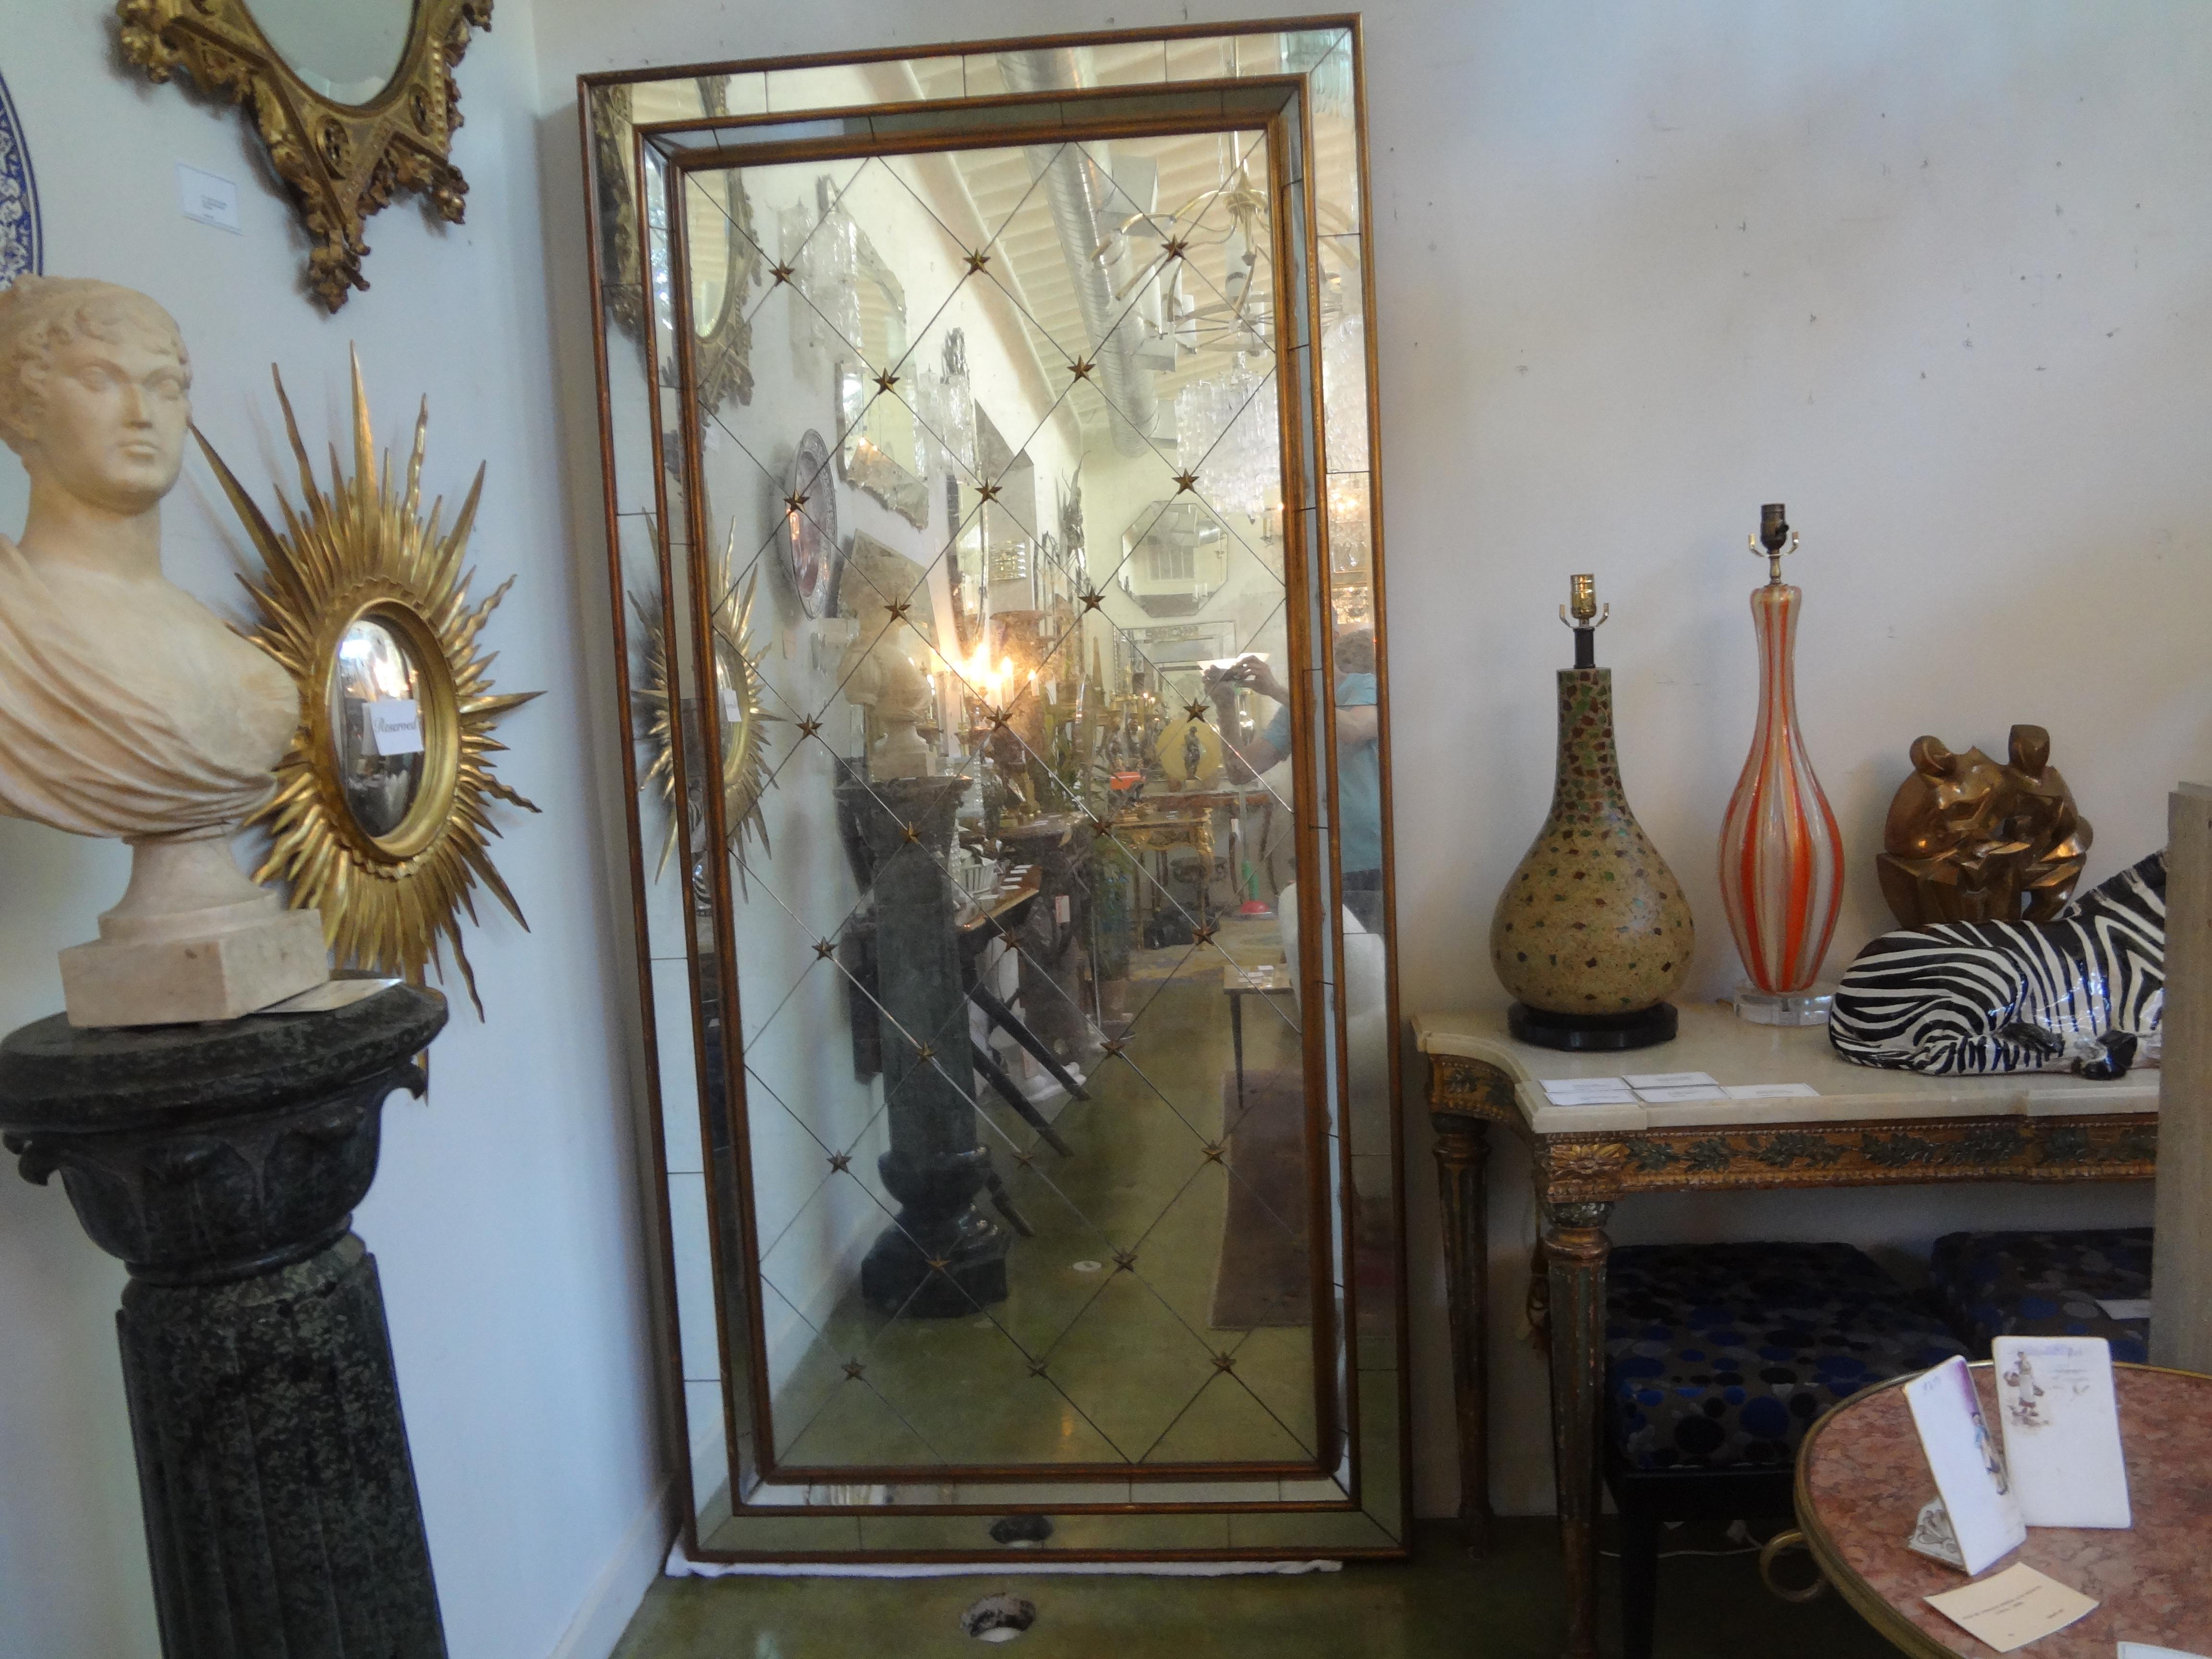 Monumental French Maison Jansen Style Mirror.
This stunning full length mirror is giltwood framed with a central area of diamond shaped mirror panels separated by gilt metal stars and a border of mirrored panels.
This outstanding Hollywood Regency